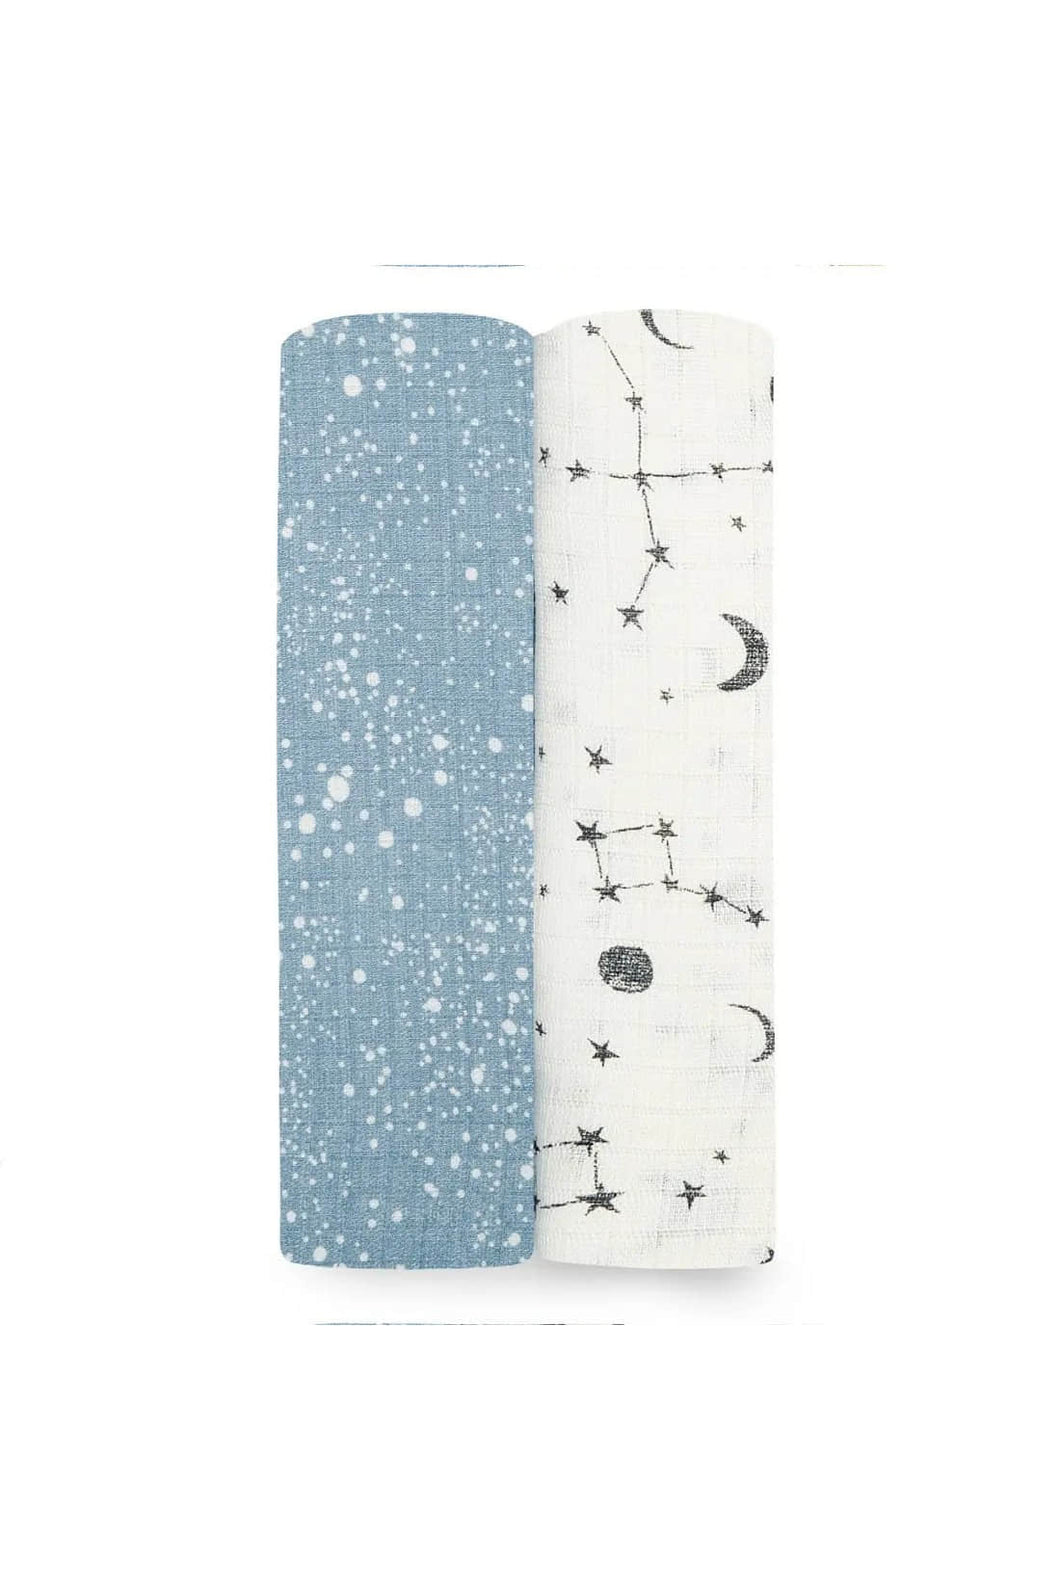 Aden + Anais Essential Silky Soft Swaddle Comics Galaxy - 2-Pack 1